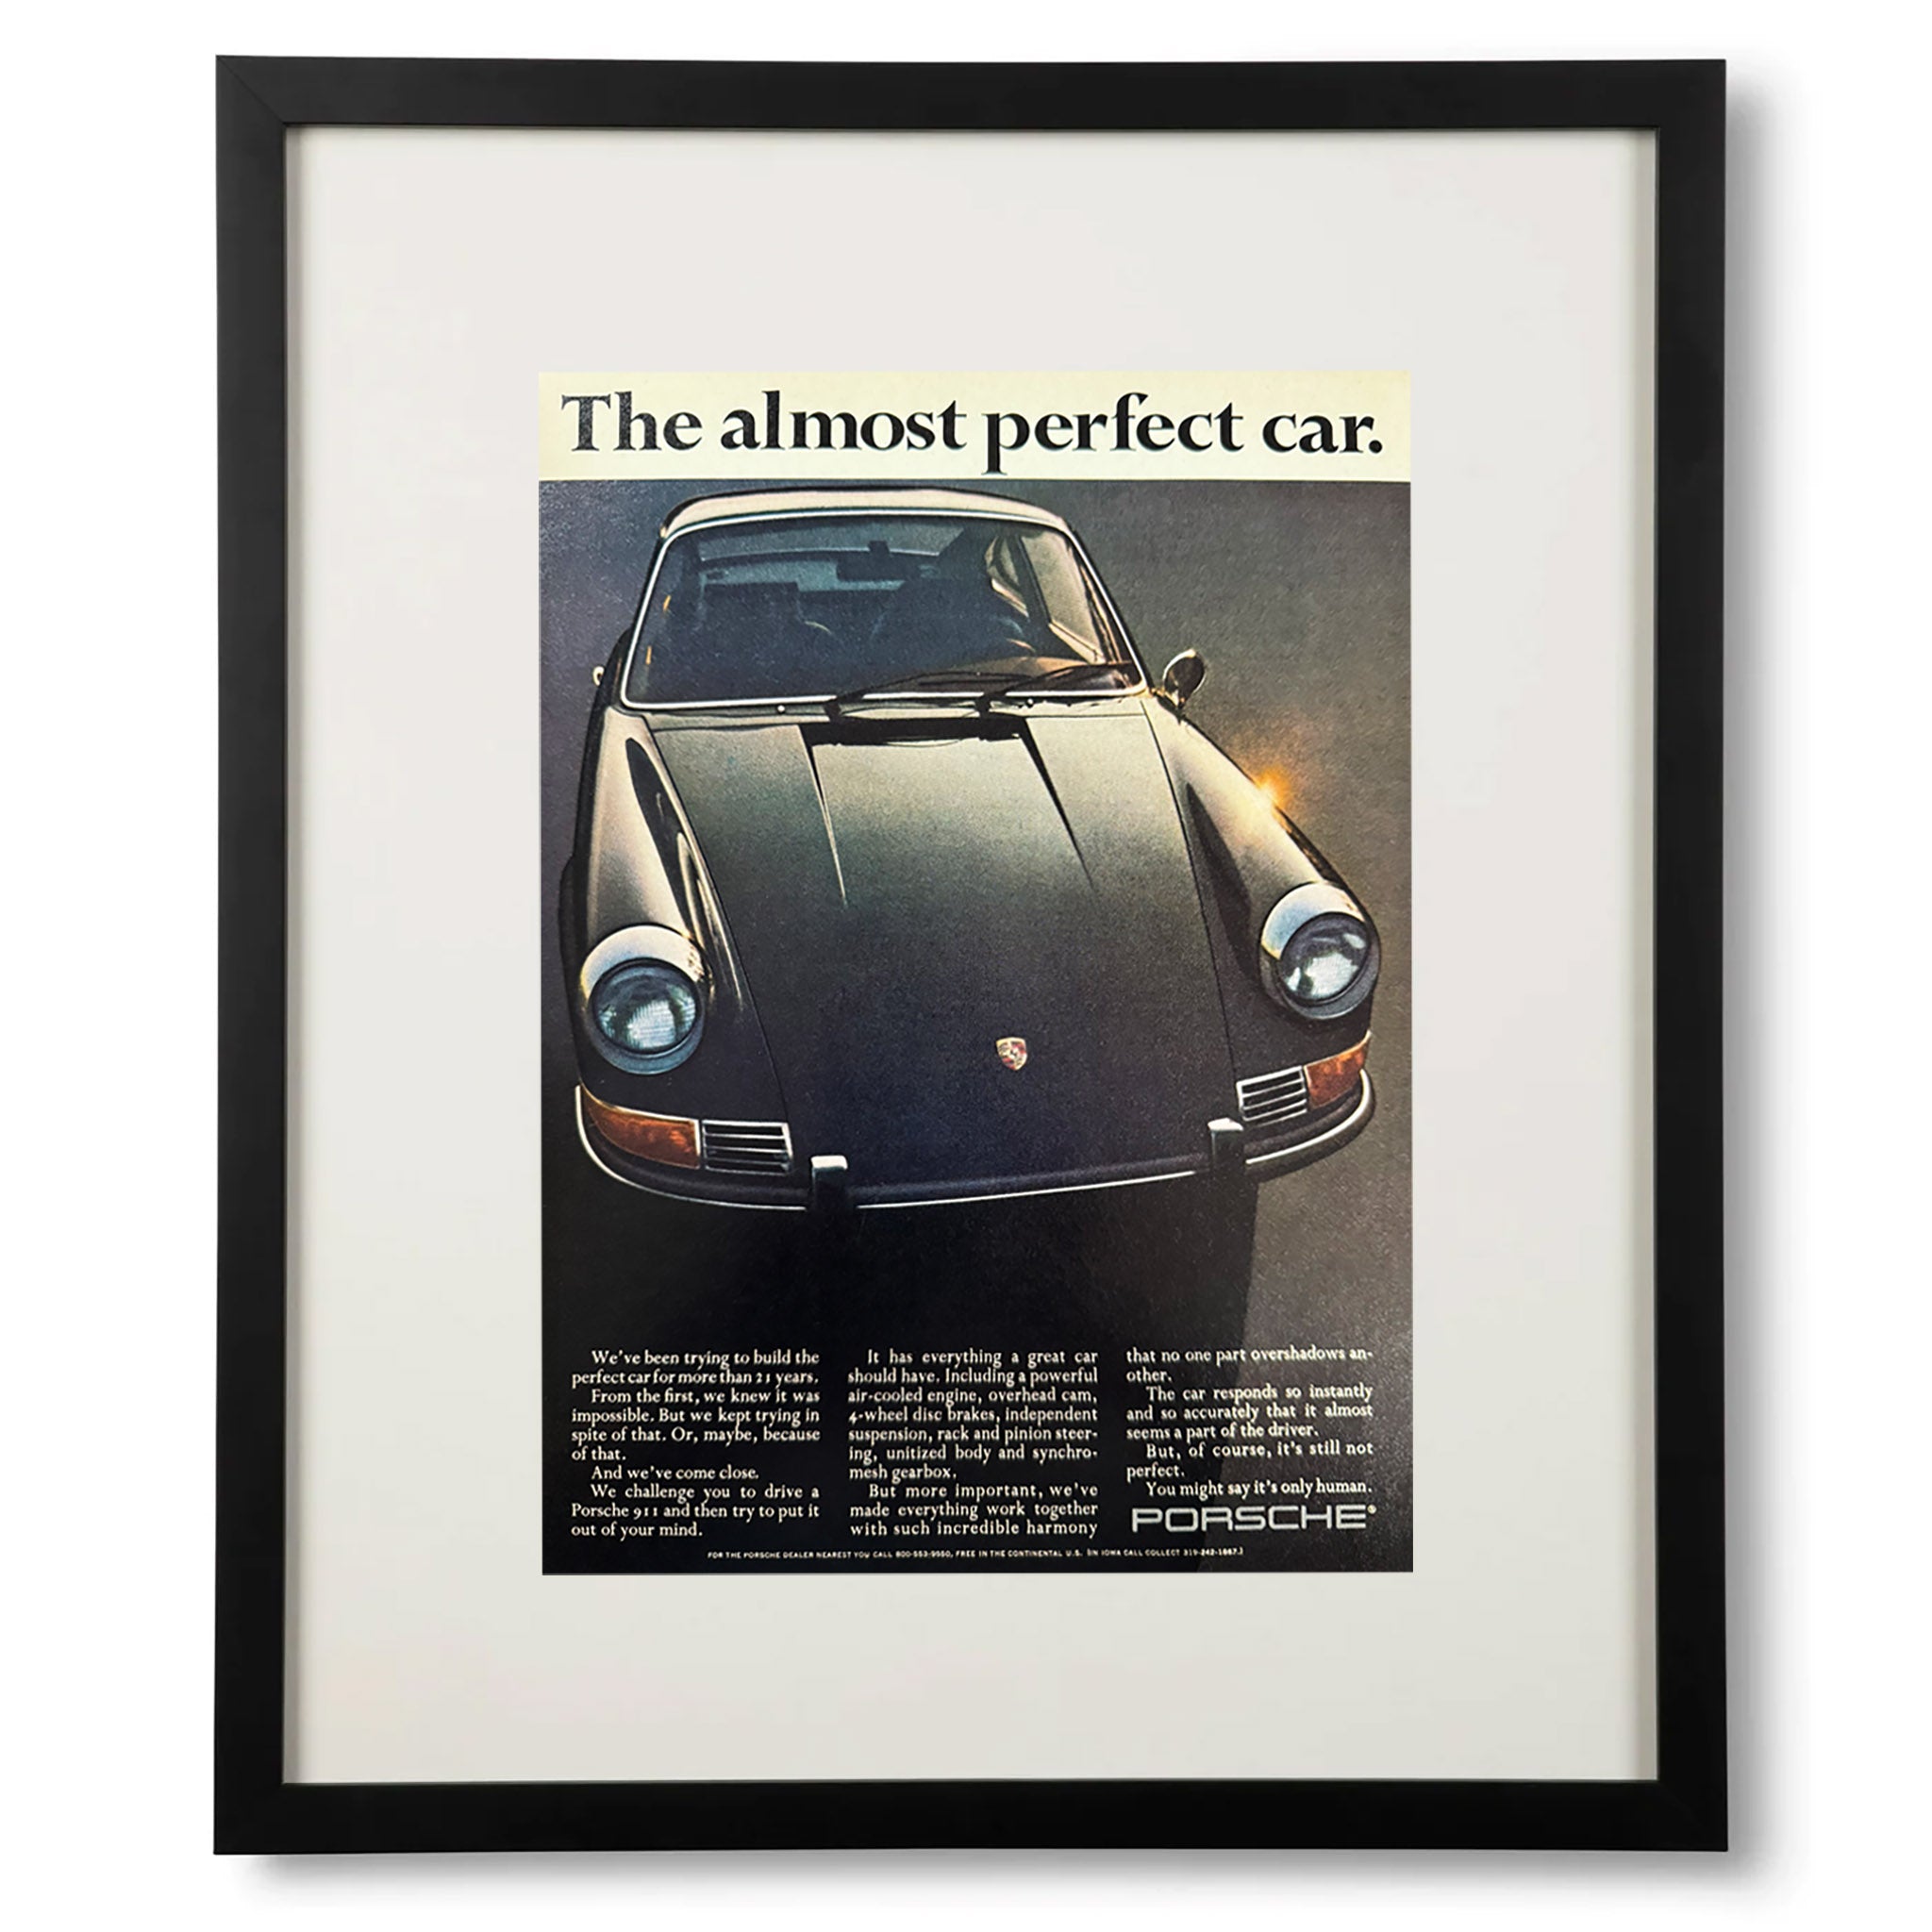 Framed Porsche 911 the Almost Perfect Car